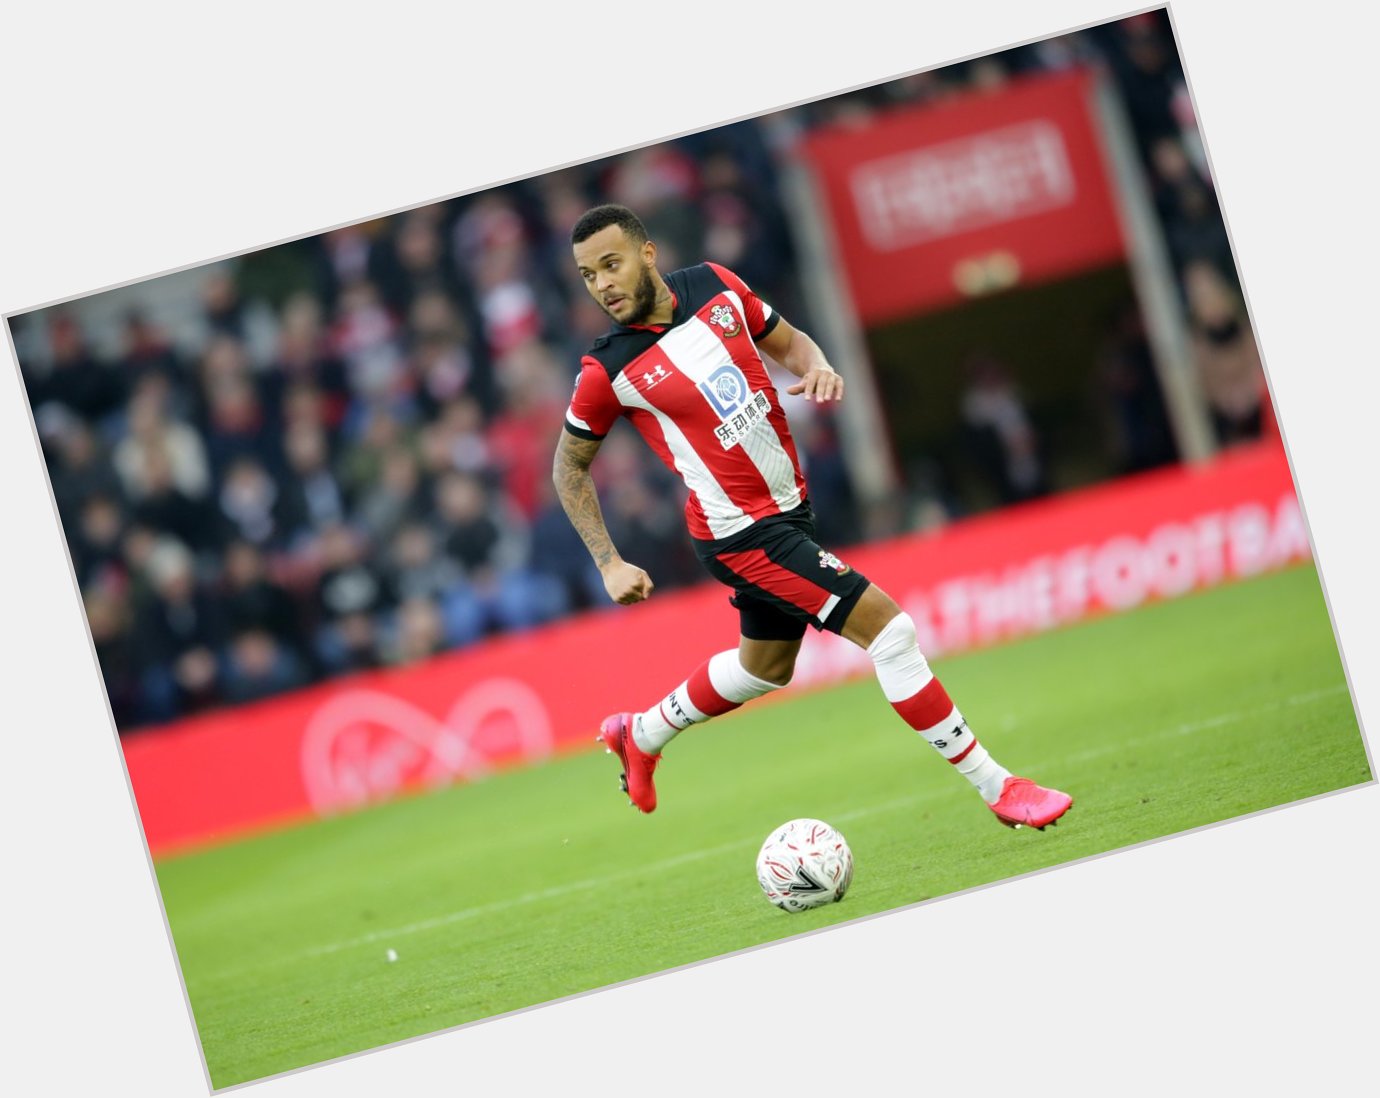 Happy birthday to Ryan Bertrand, who is 31 today. What would your message be to the full-back? 